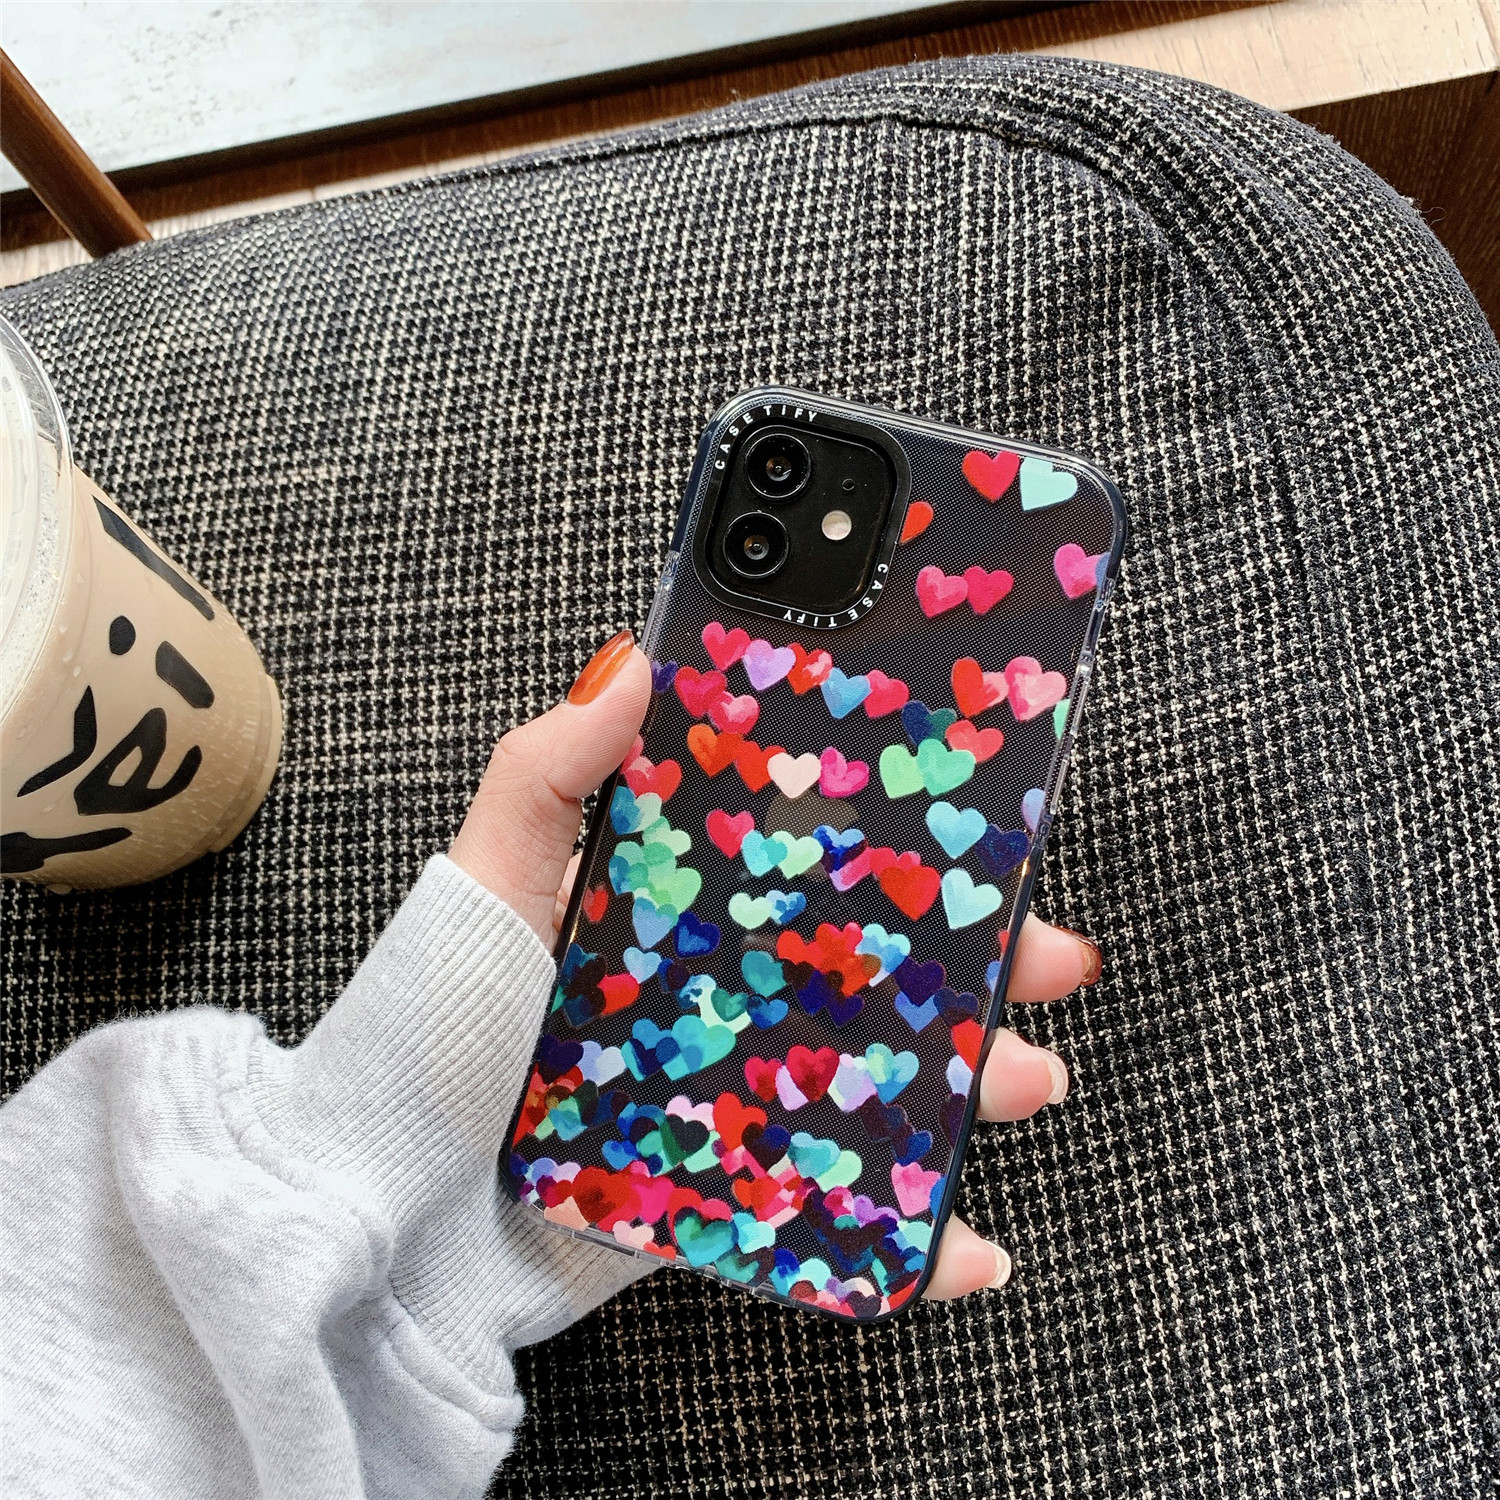 Gradient Heart Pattern Mobile Phone Case For Iphone 7 7 P 8 8 P X Xs Xr Xsmax 11 11 Promax 12 Pro 12promax 85